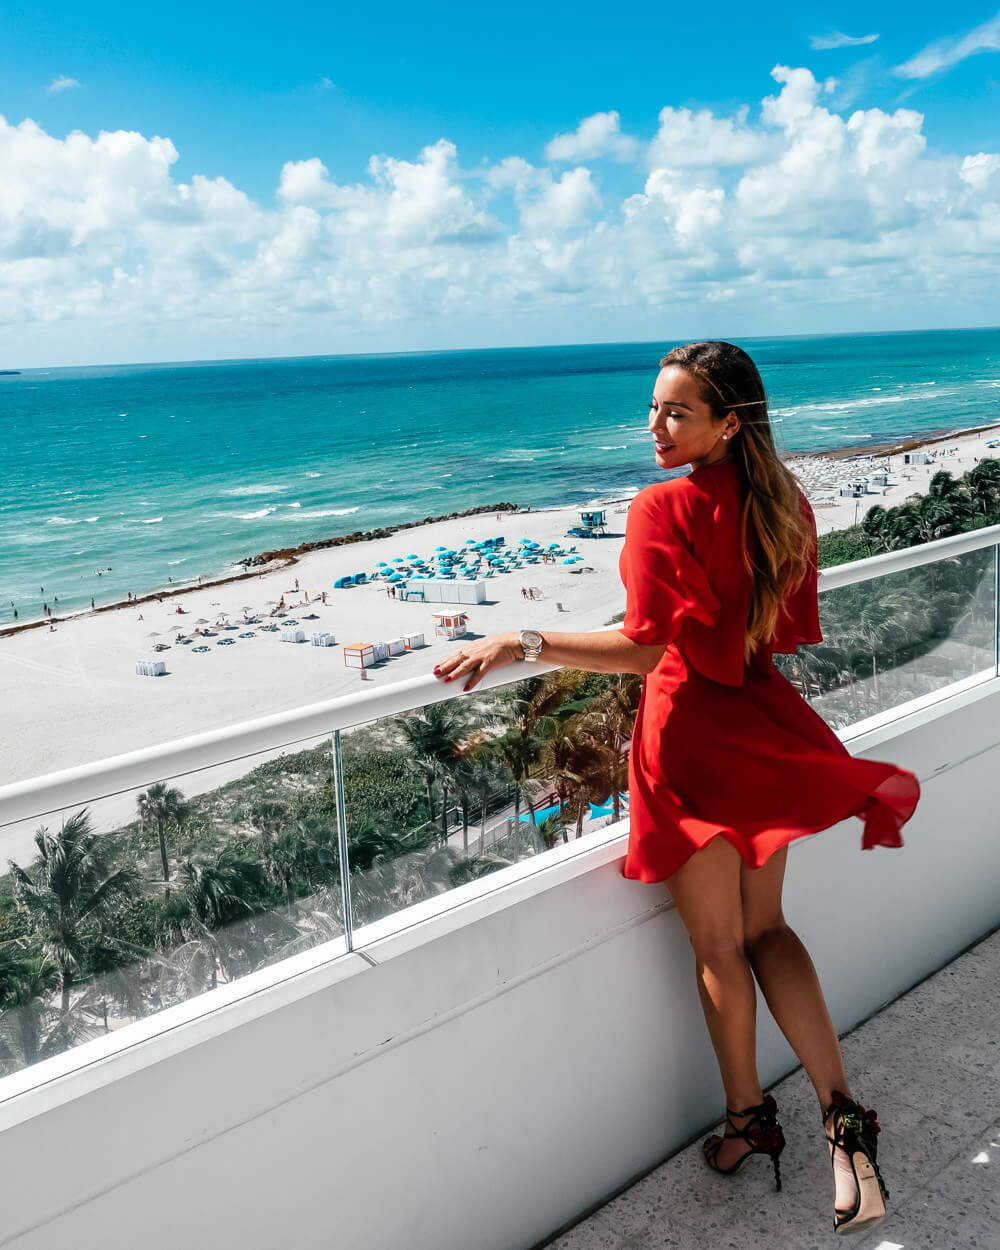 Isabella-at-Miami-Beach-on-balcony-wearing-red-dress